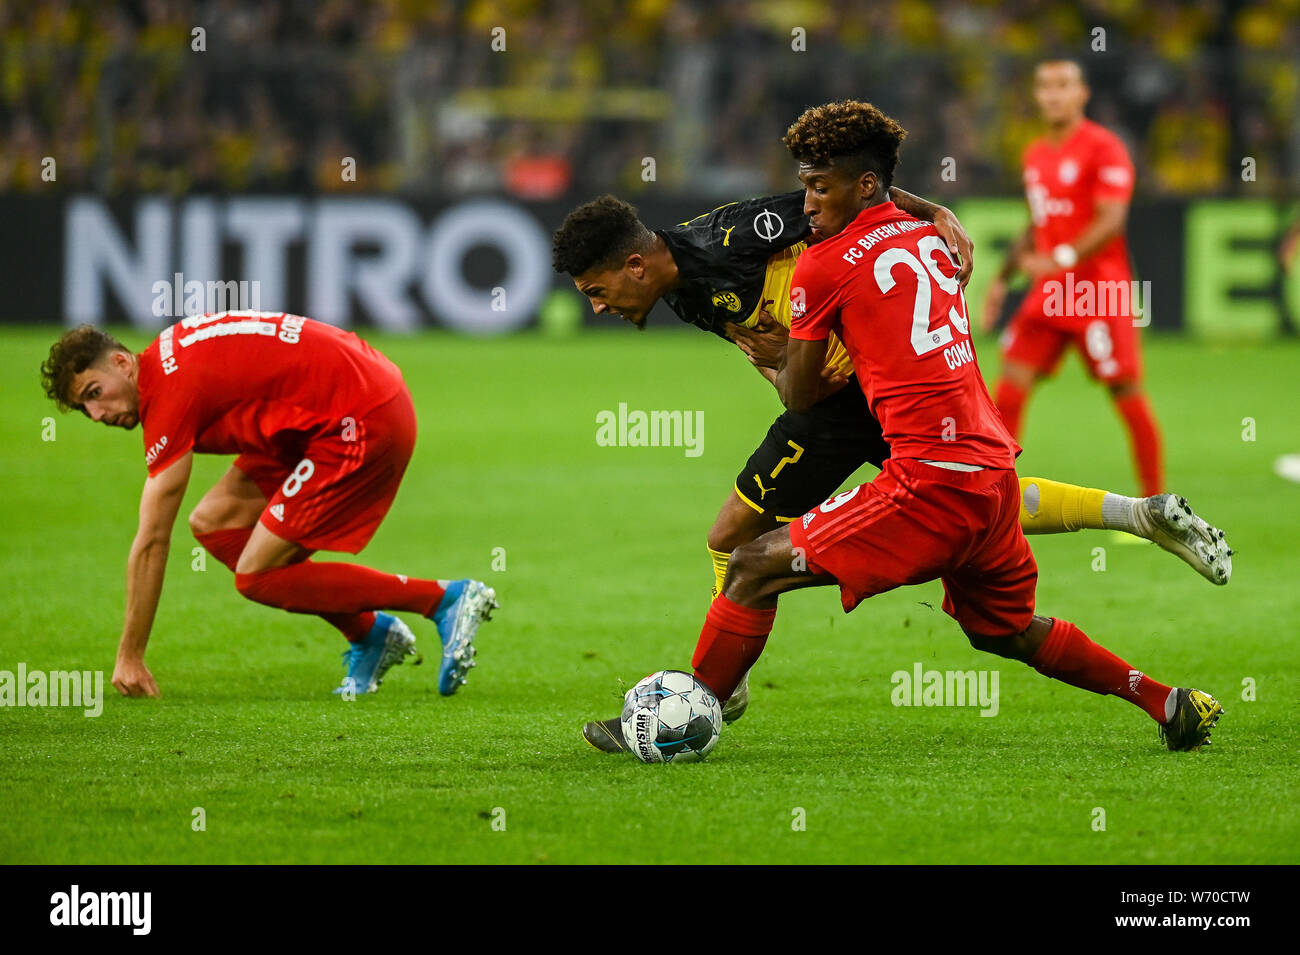 Jadon Sancho from Borussia Dortmund (L) and Kingsley Coman from Bayern Munich (R) are seen in action during the Germany Supercup Final 2019 match between Borussia Dortmund and Bayern Munich(Final score: Borussia Dortmund 2:0 Bayern Munich) Stock Photo